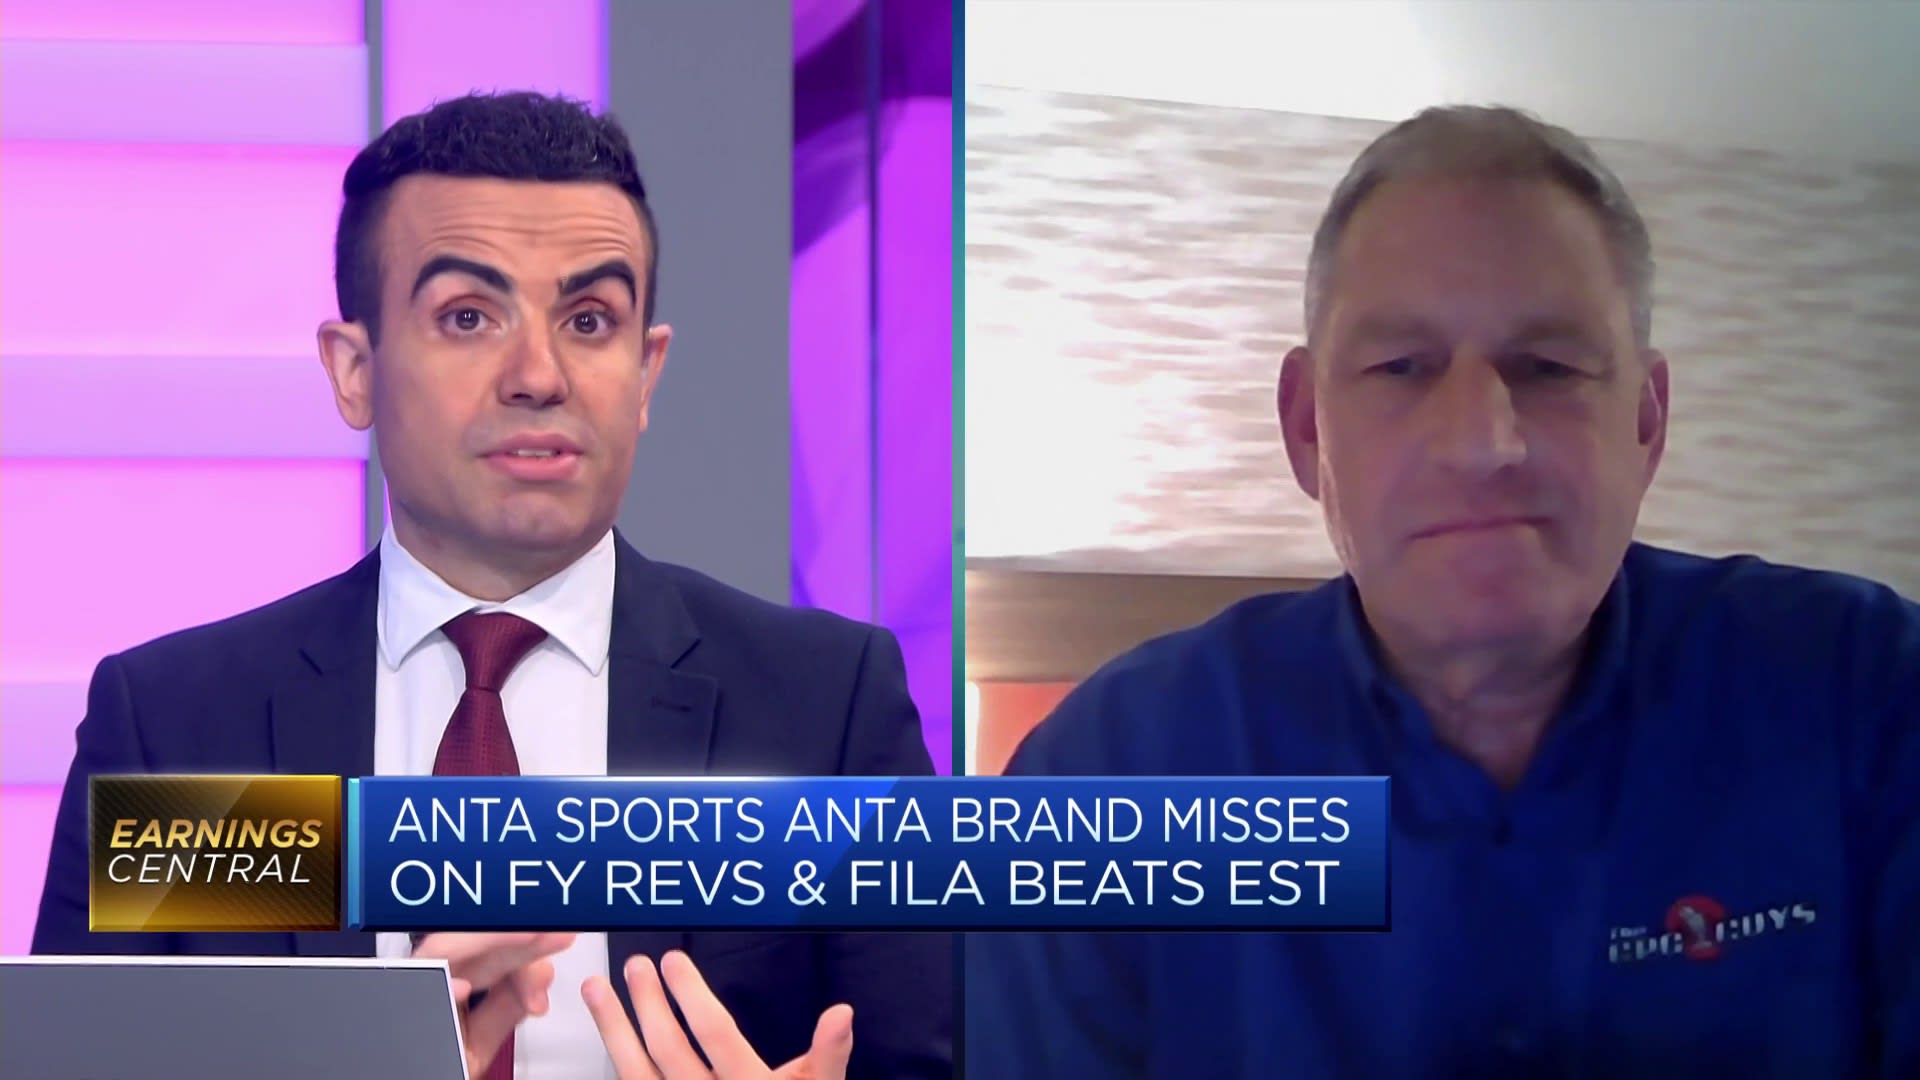 Anta Sports has right strategy for China; growth is ‘underappreciated’ [Video]